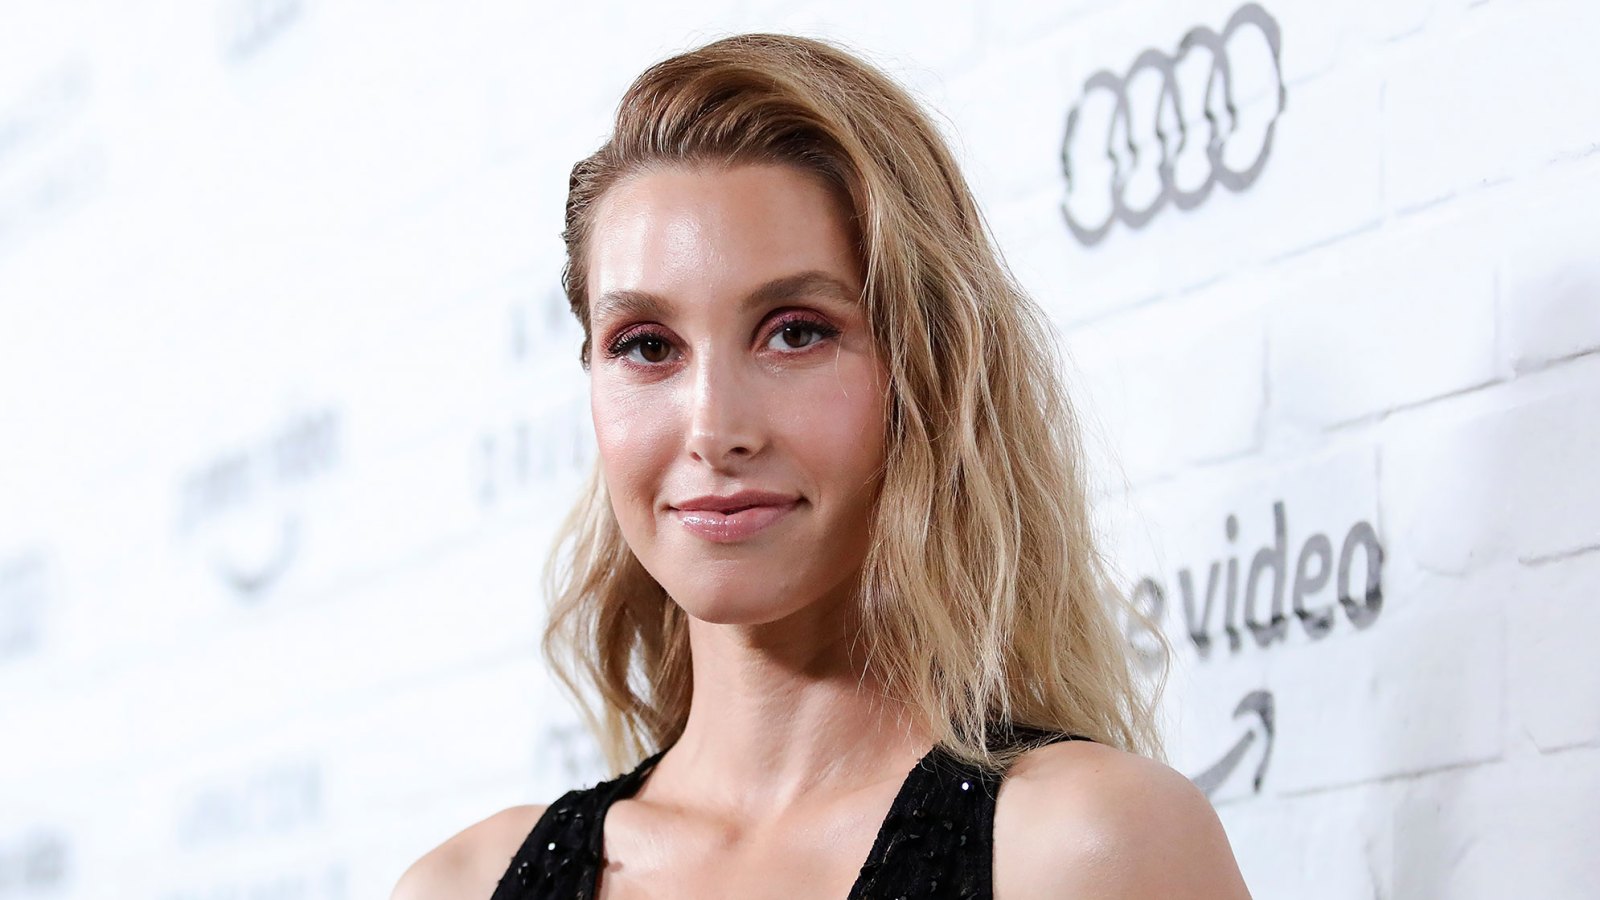 Why Whitney Port Isn’t Ready for Adoption ‘Yet’ After 2 Miscarriages